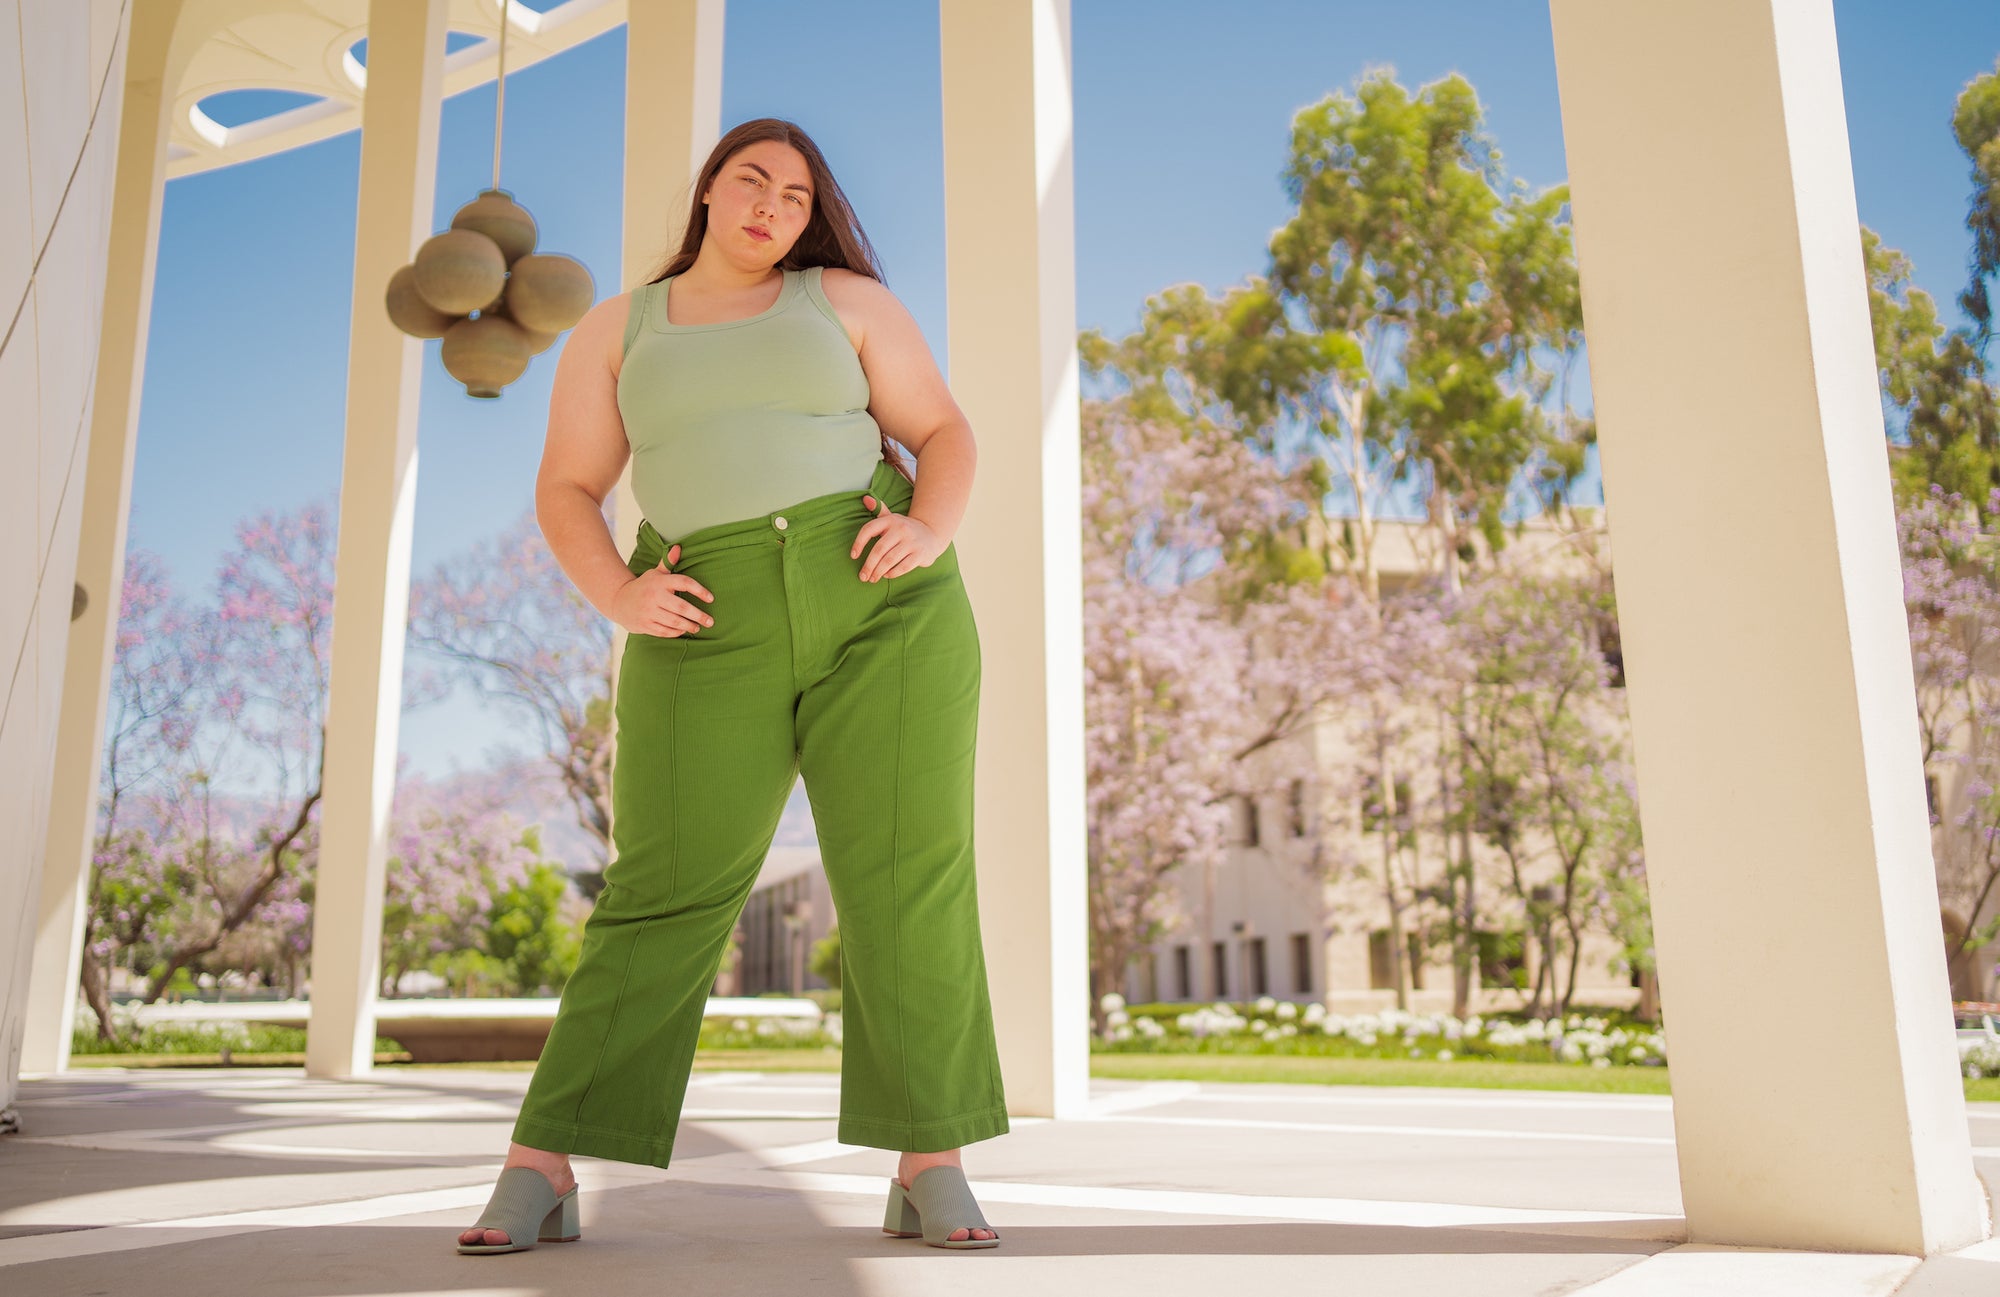 Marielena is wearing Heritage Westerns in Lawn Green and Tank Top in Sage Green